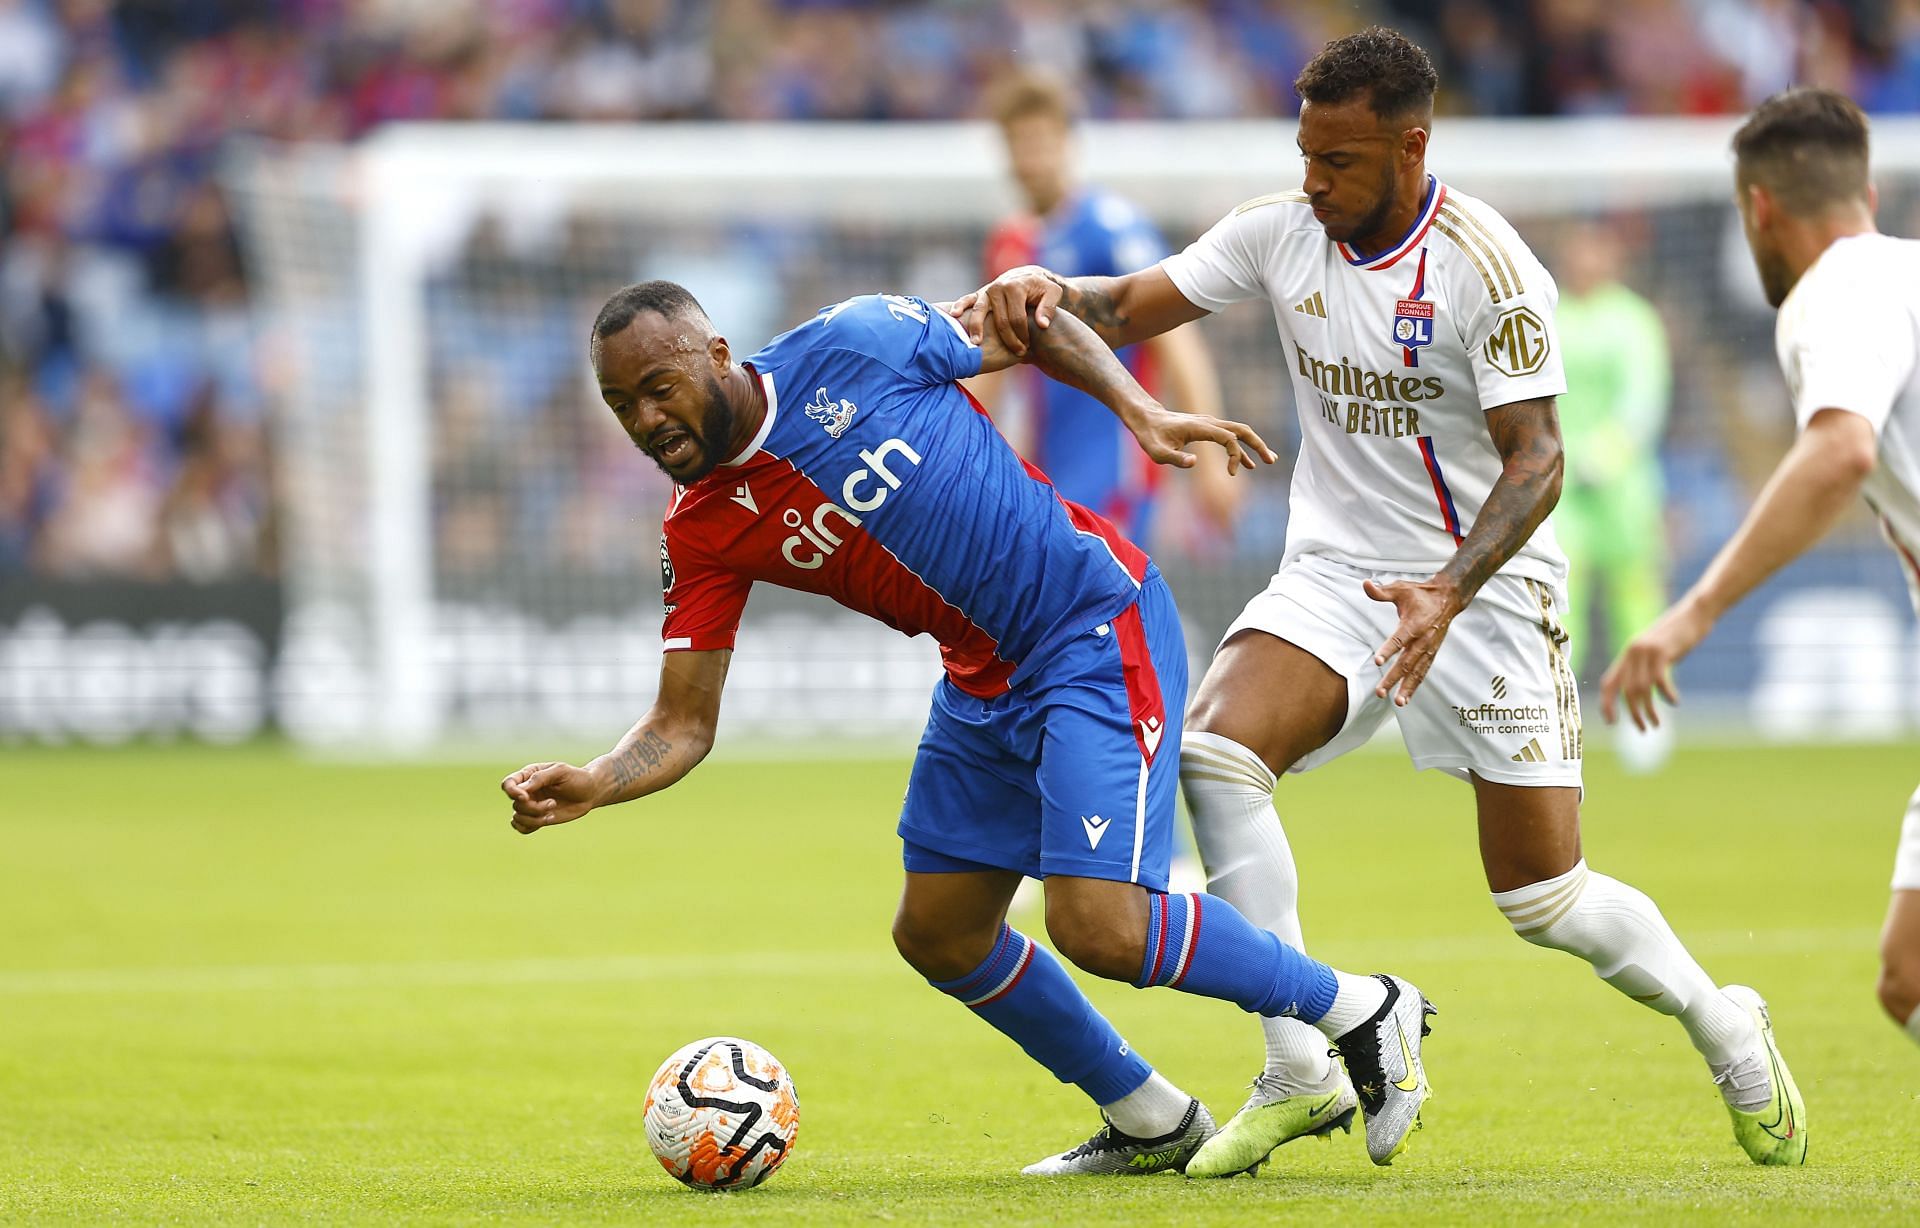 Crystal Palace take on Sheffield United this weekend